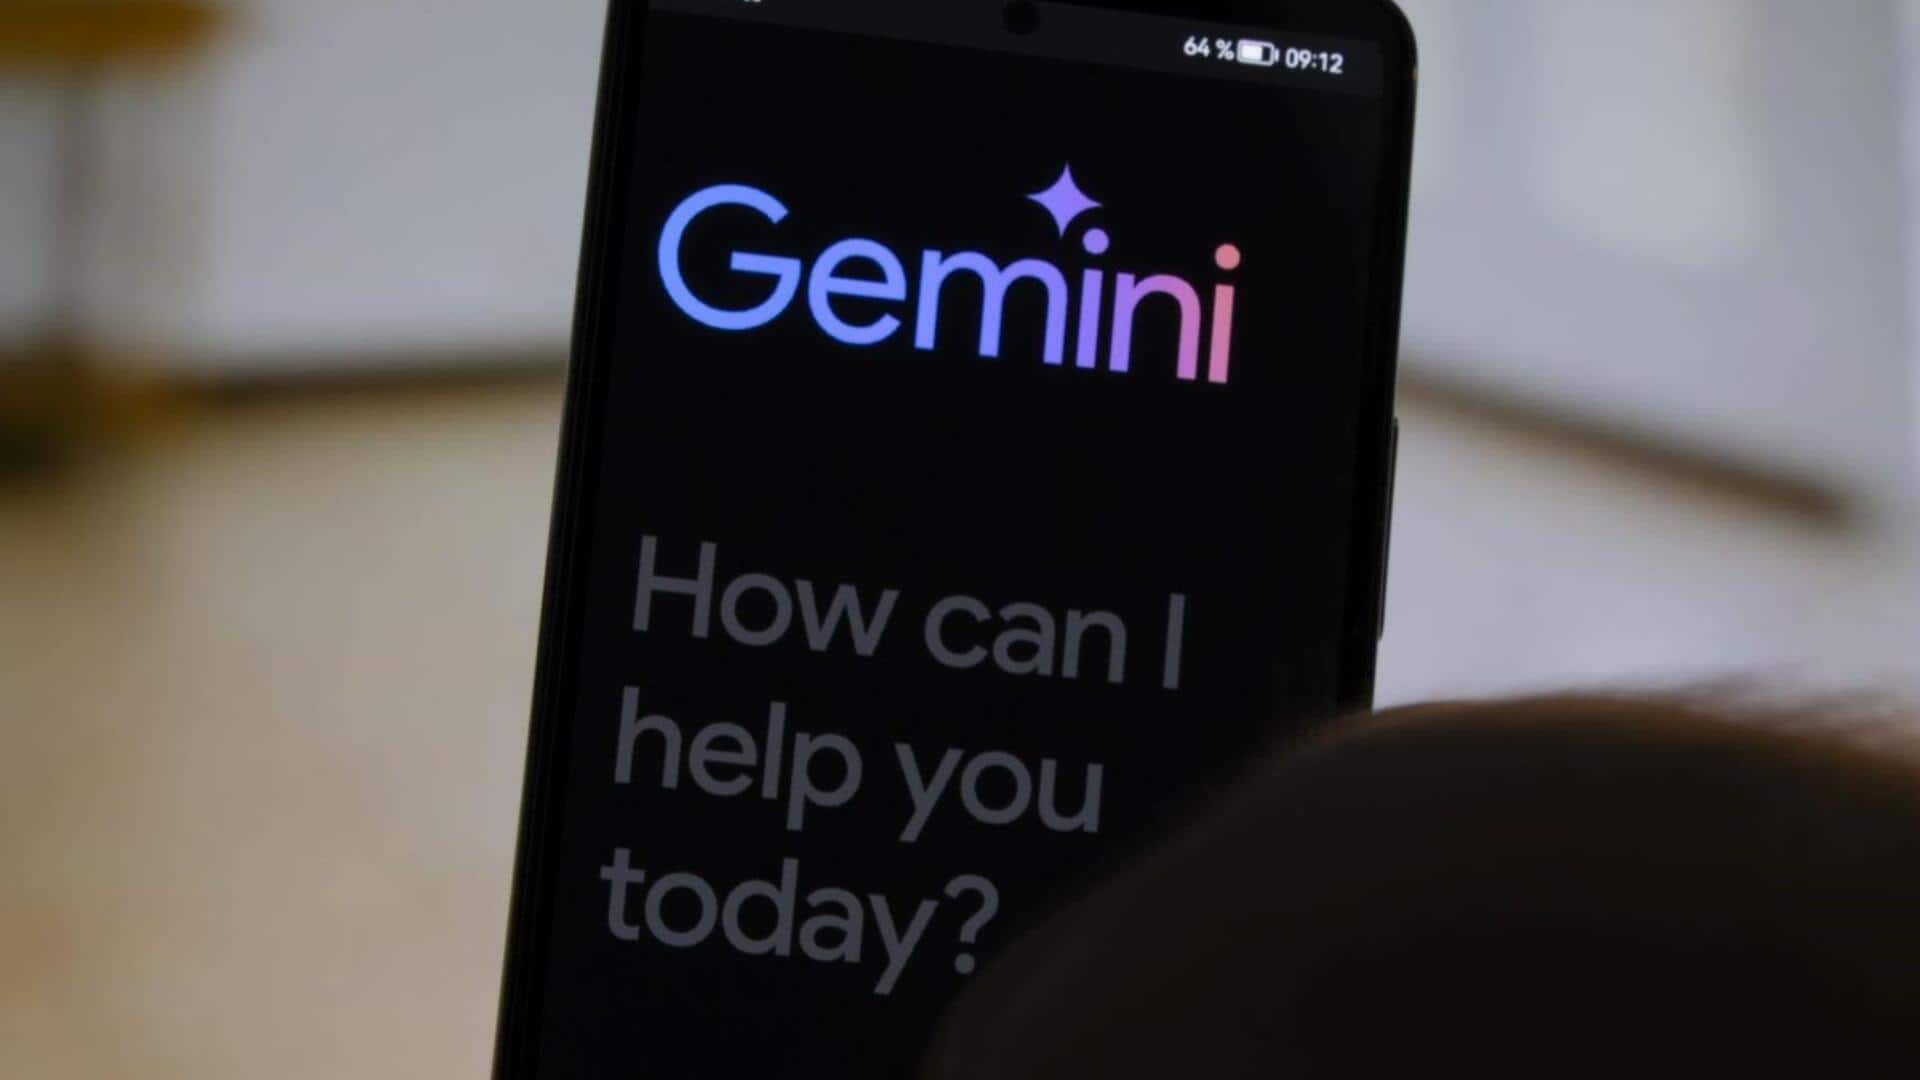 Google's Gemini AI to one up Siri with multi-window support